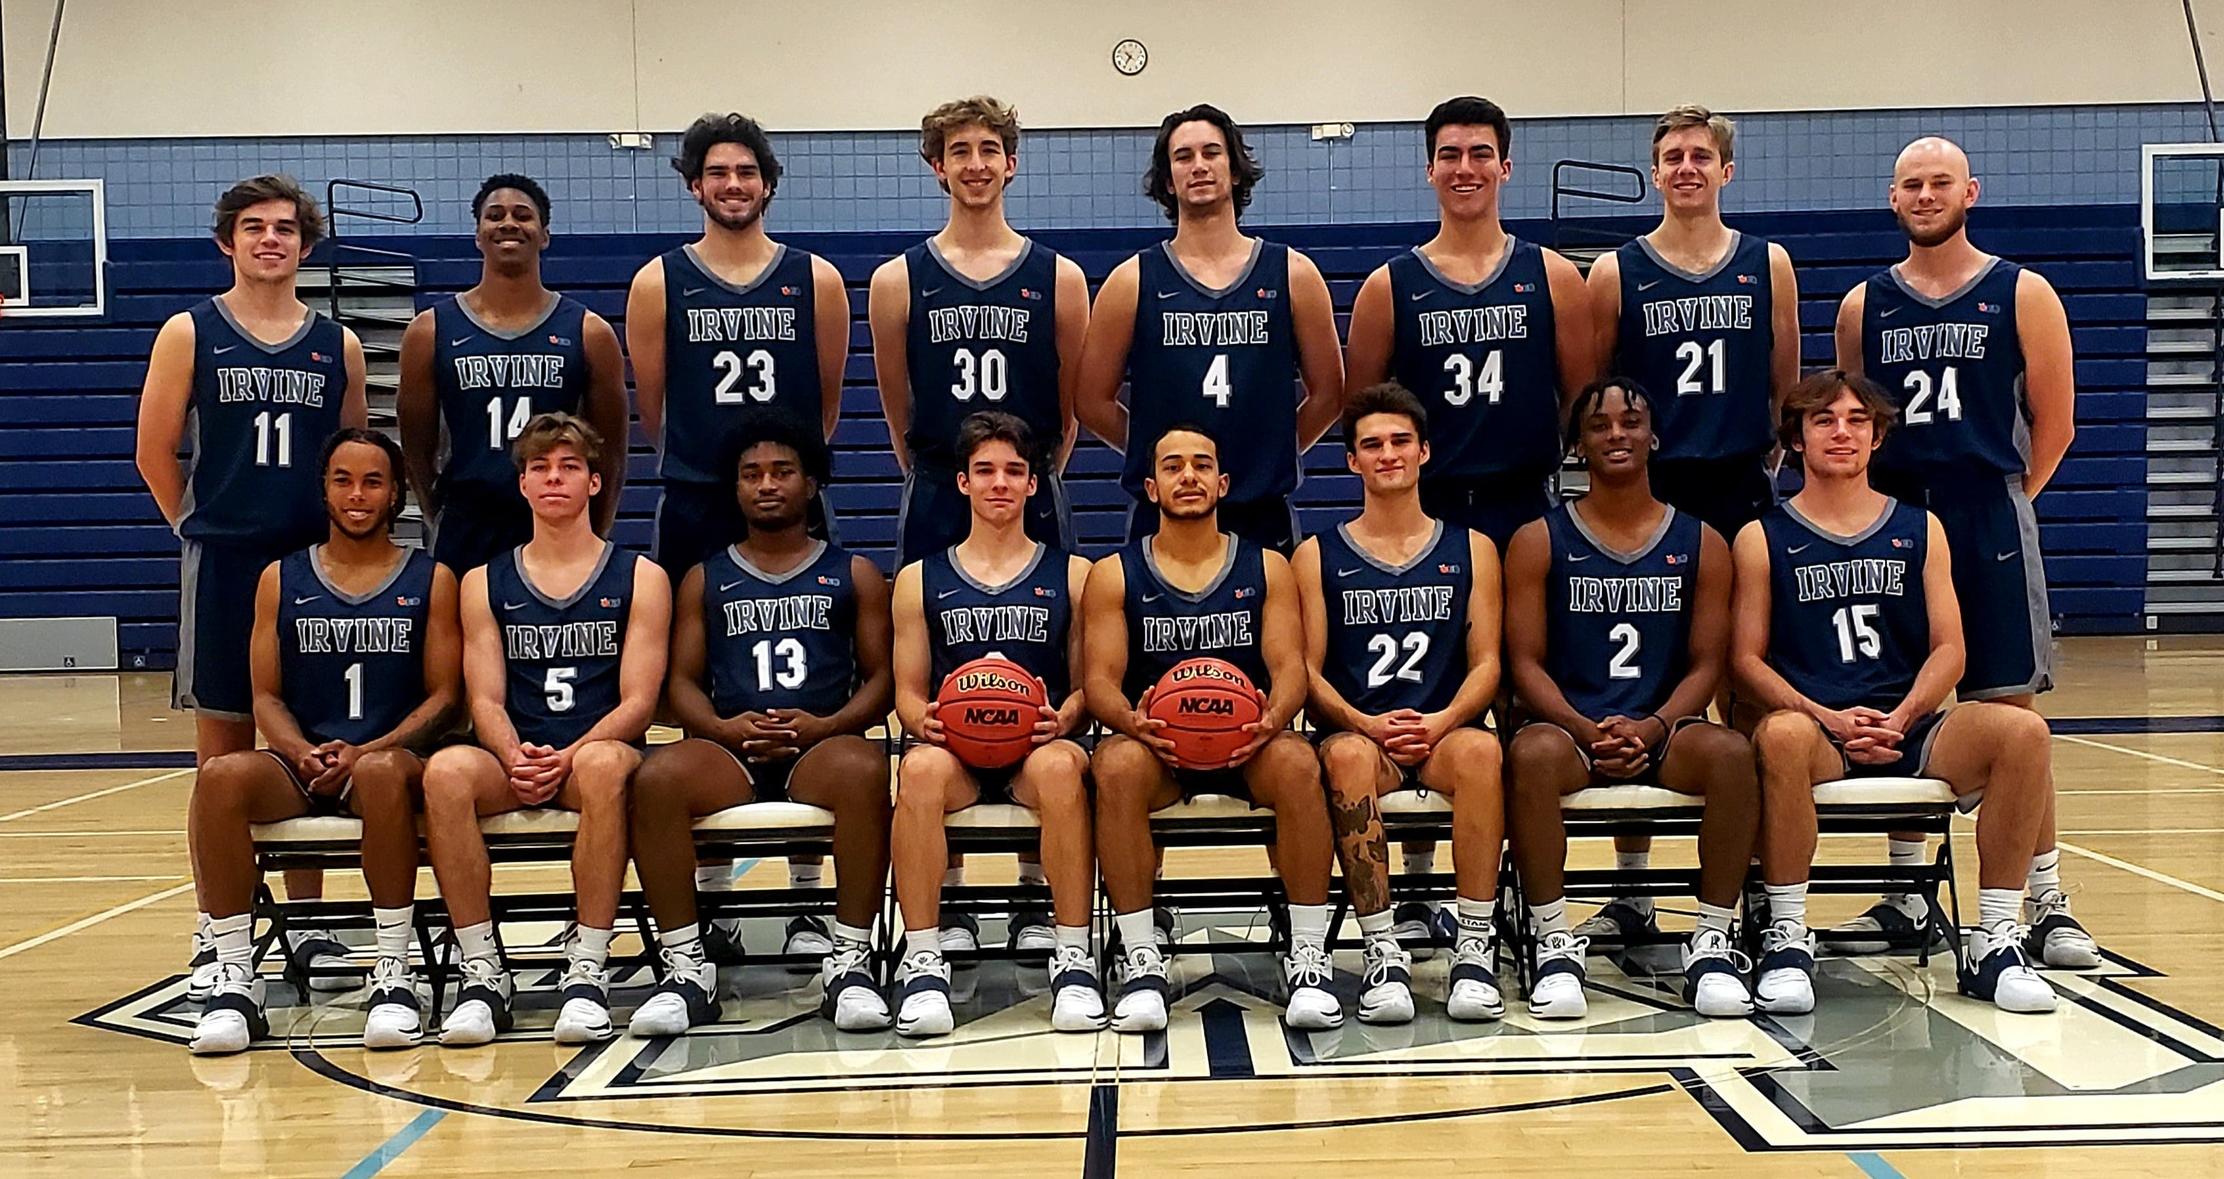 Men's basketball team to host playoff game Tuesday night